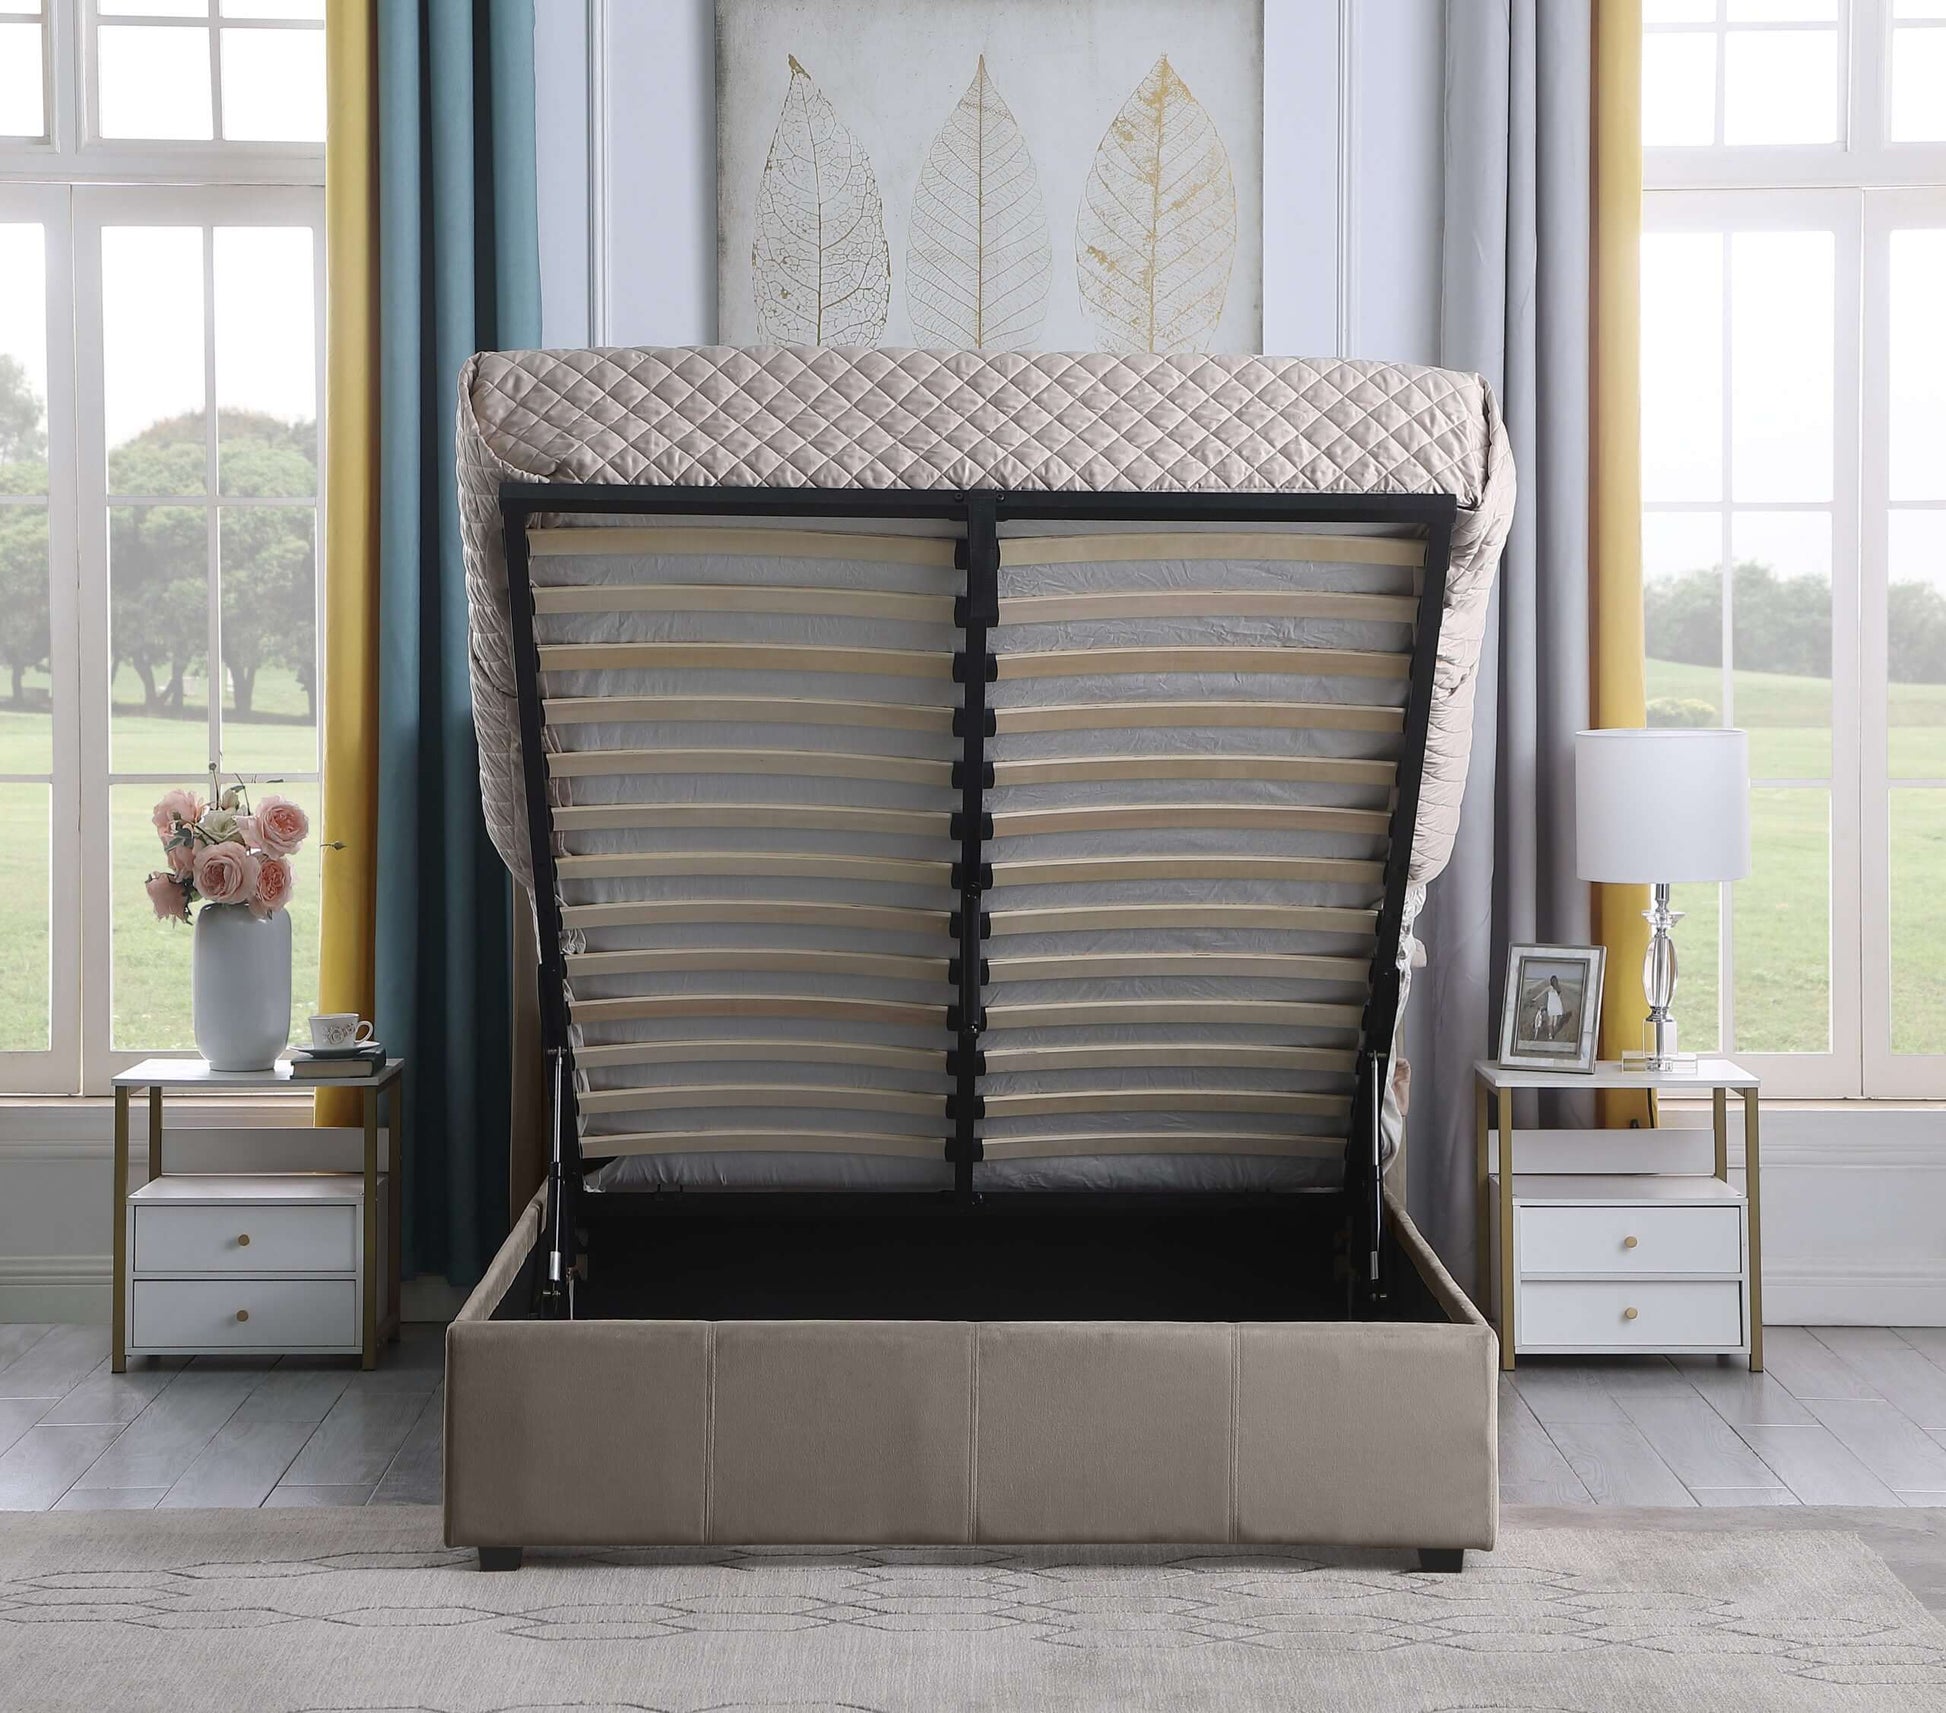 Amelia Plus 4'6" Storage Bed Oyster Velvet Fabric- The Right Buy Store